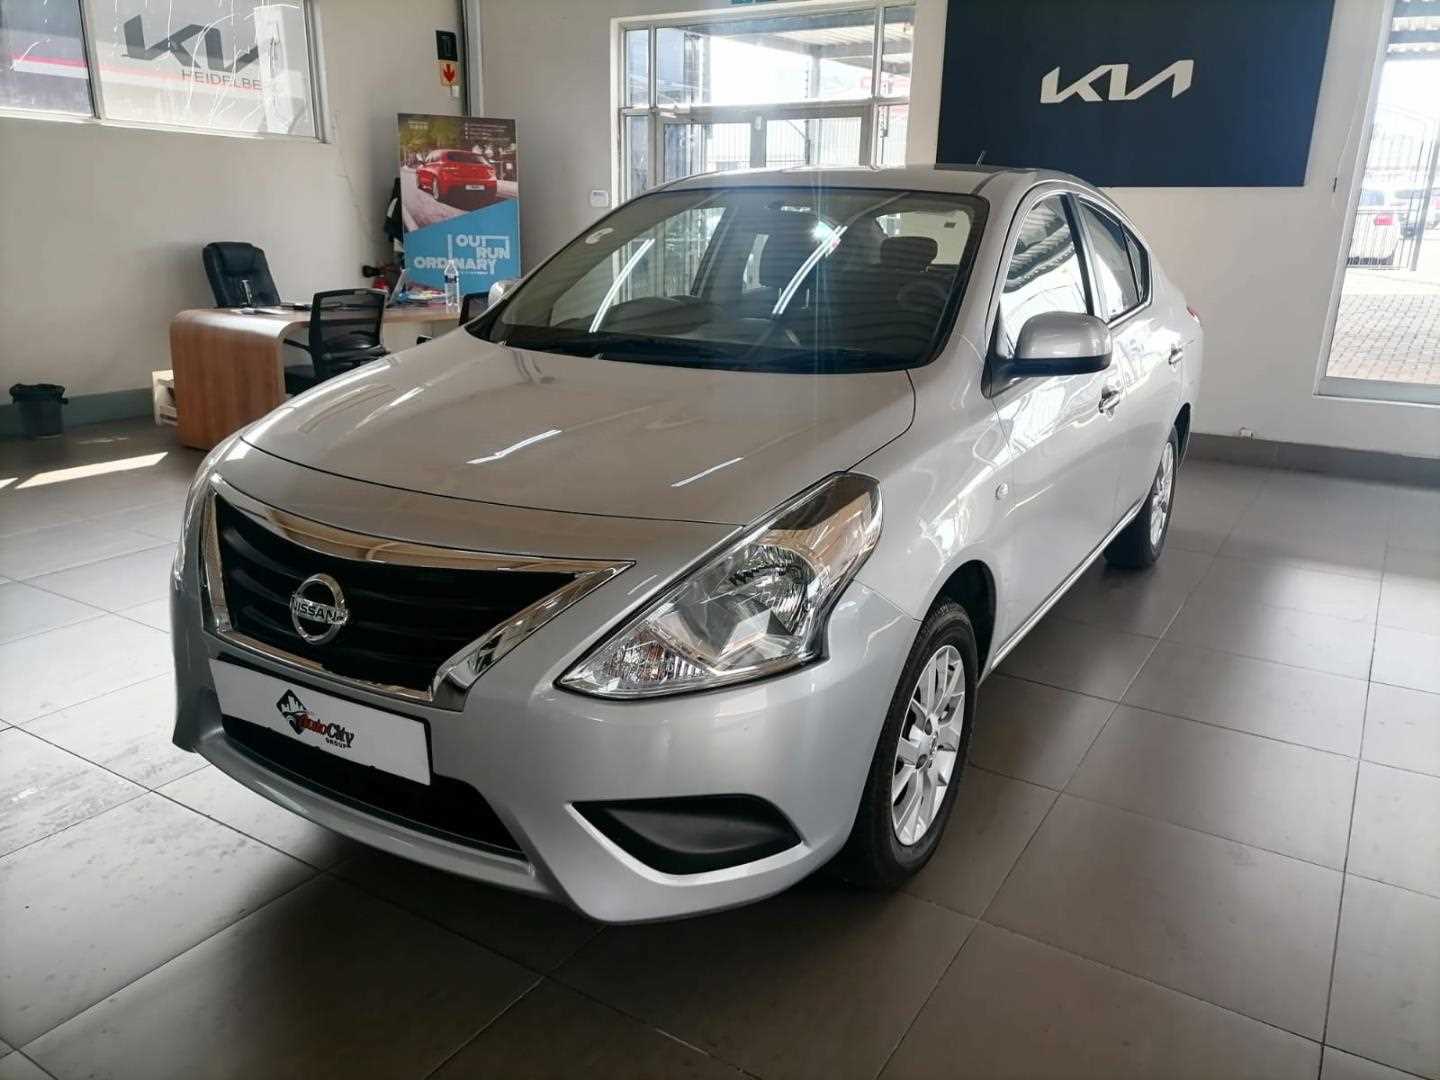 Nissan ALMERA 1.5 ACENTA A/T for Sale in South Africa